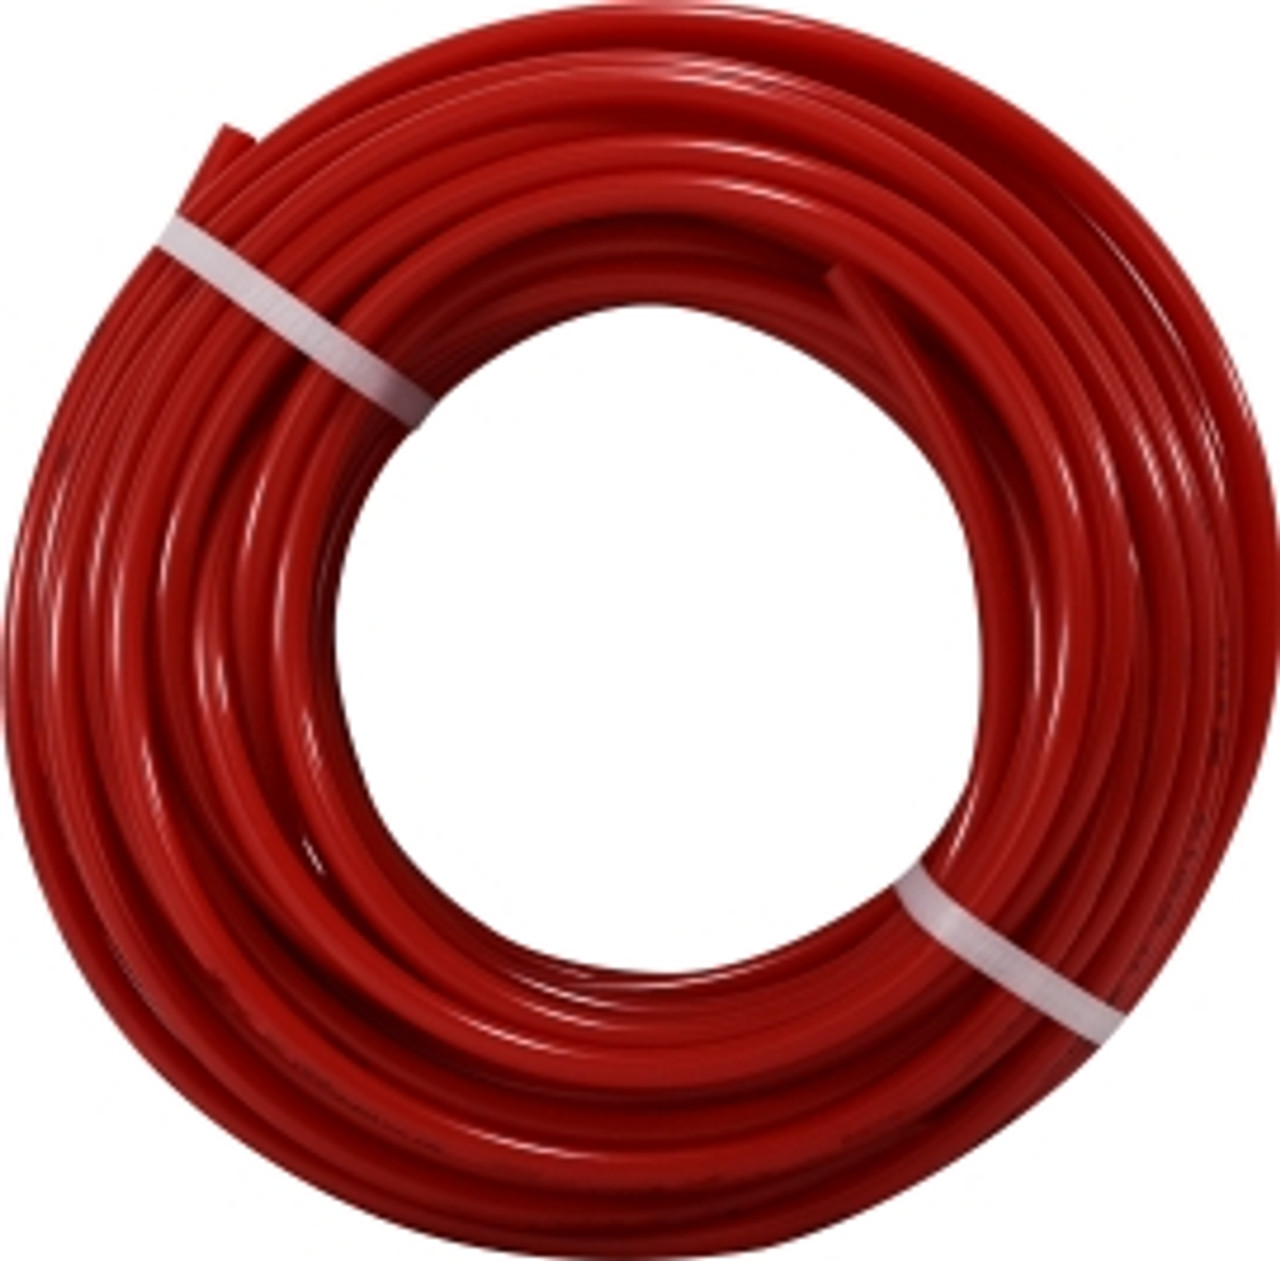 1000 Red Reel 1/4 OD RED POLY TUBING 1000 - 73203R1